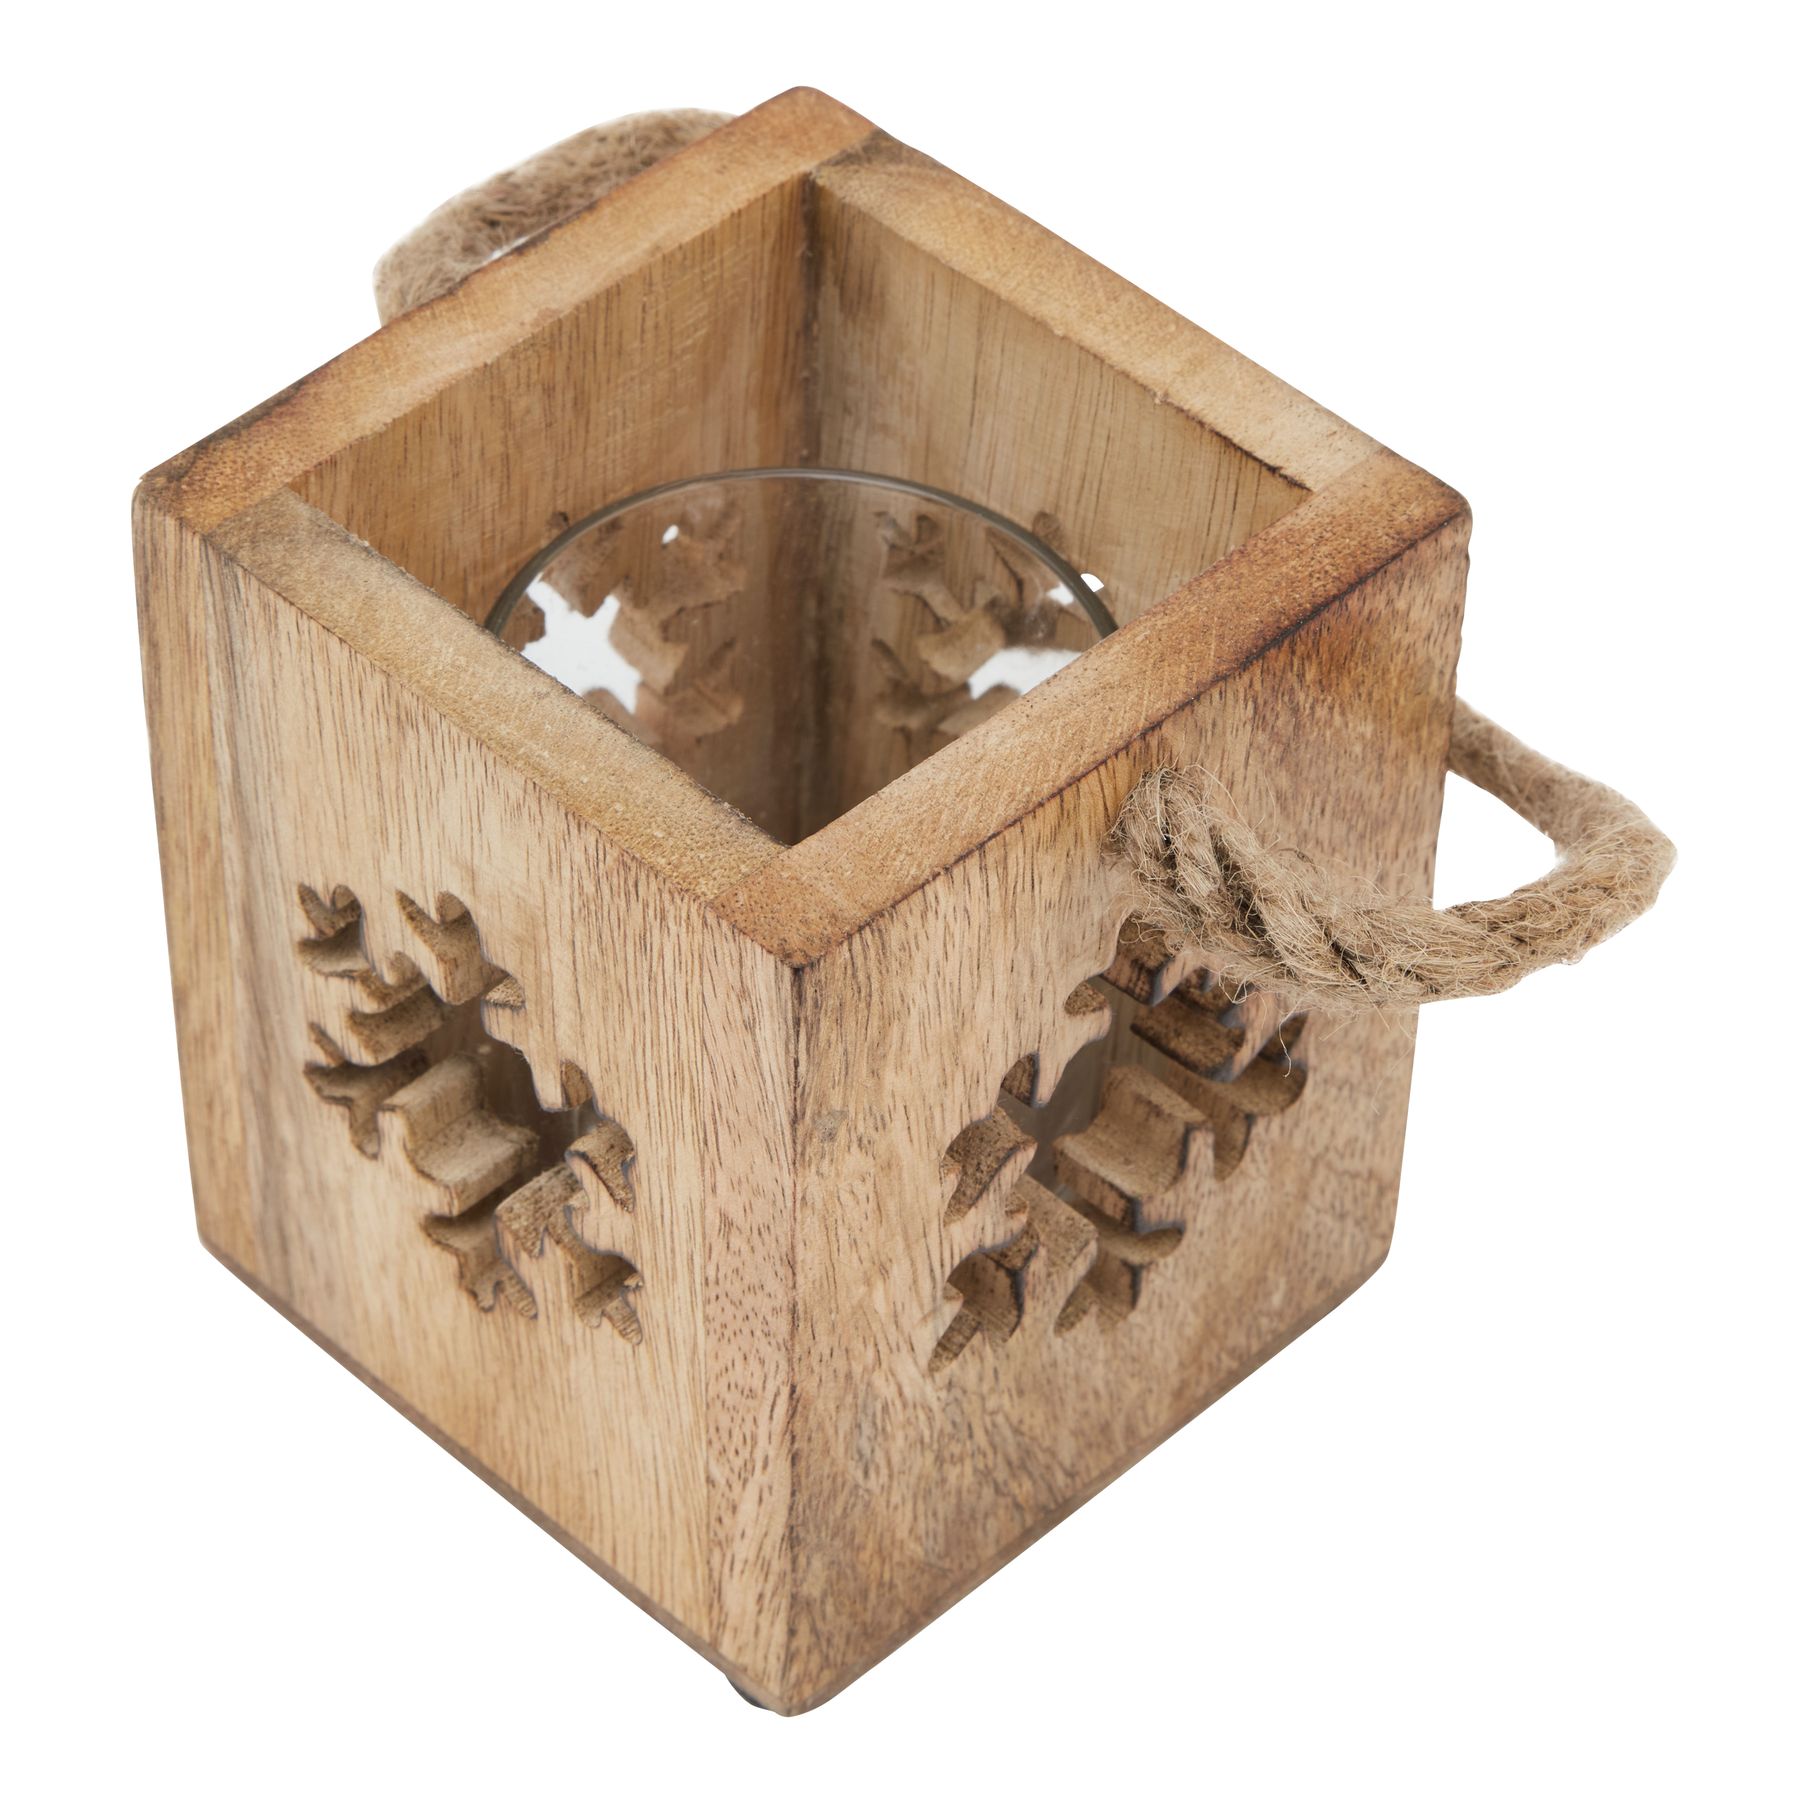 Natural Wooden Small Snowflake Tealight Candle Holder - Image 2